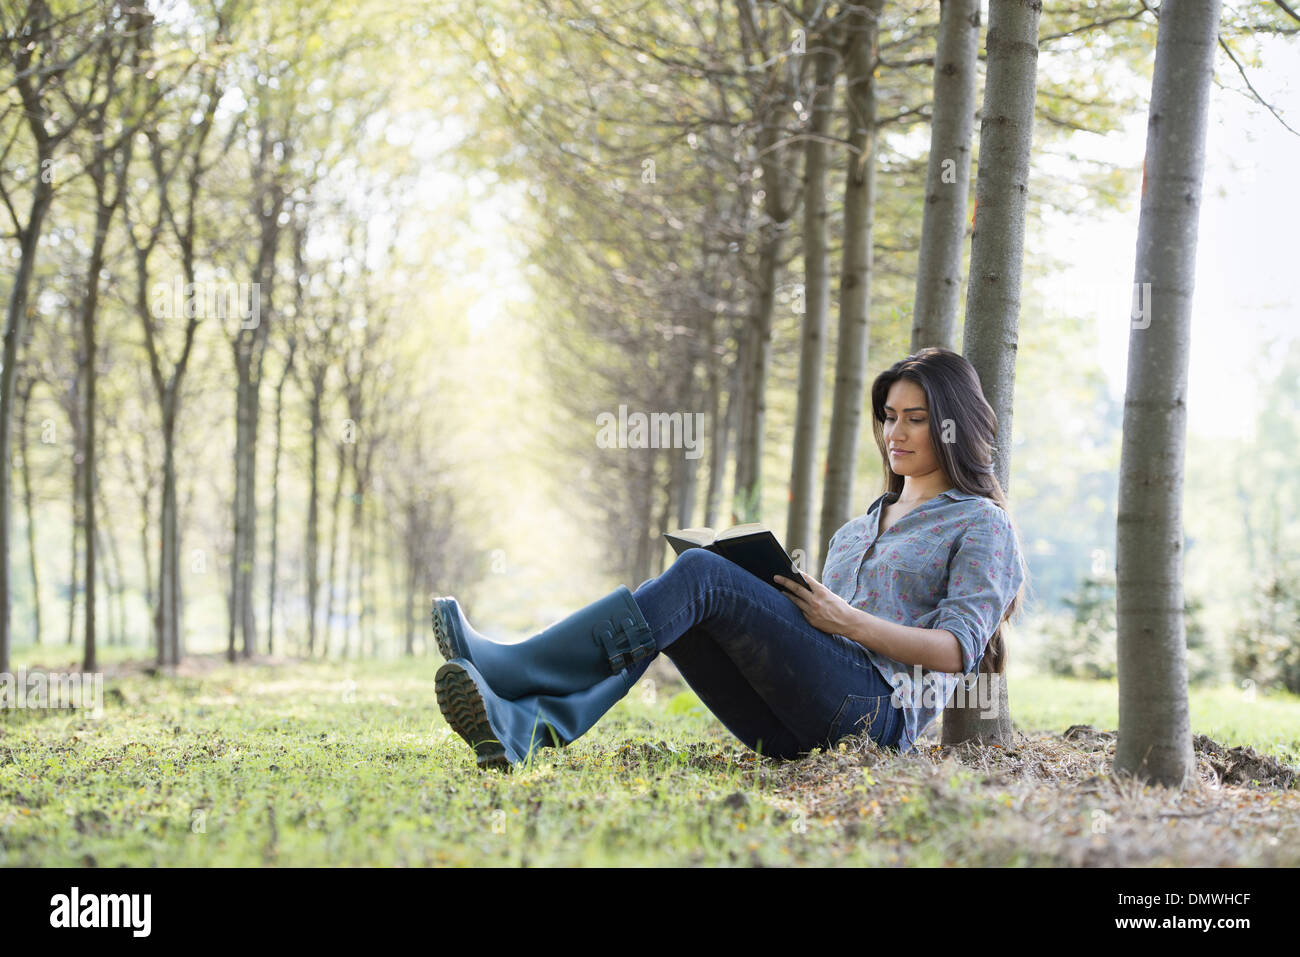 A woman sitting reading a book under  trees. Stock Photo